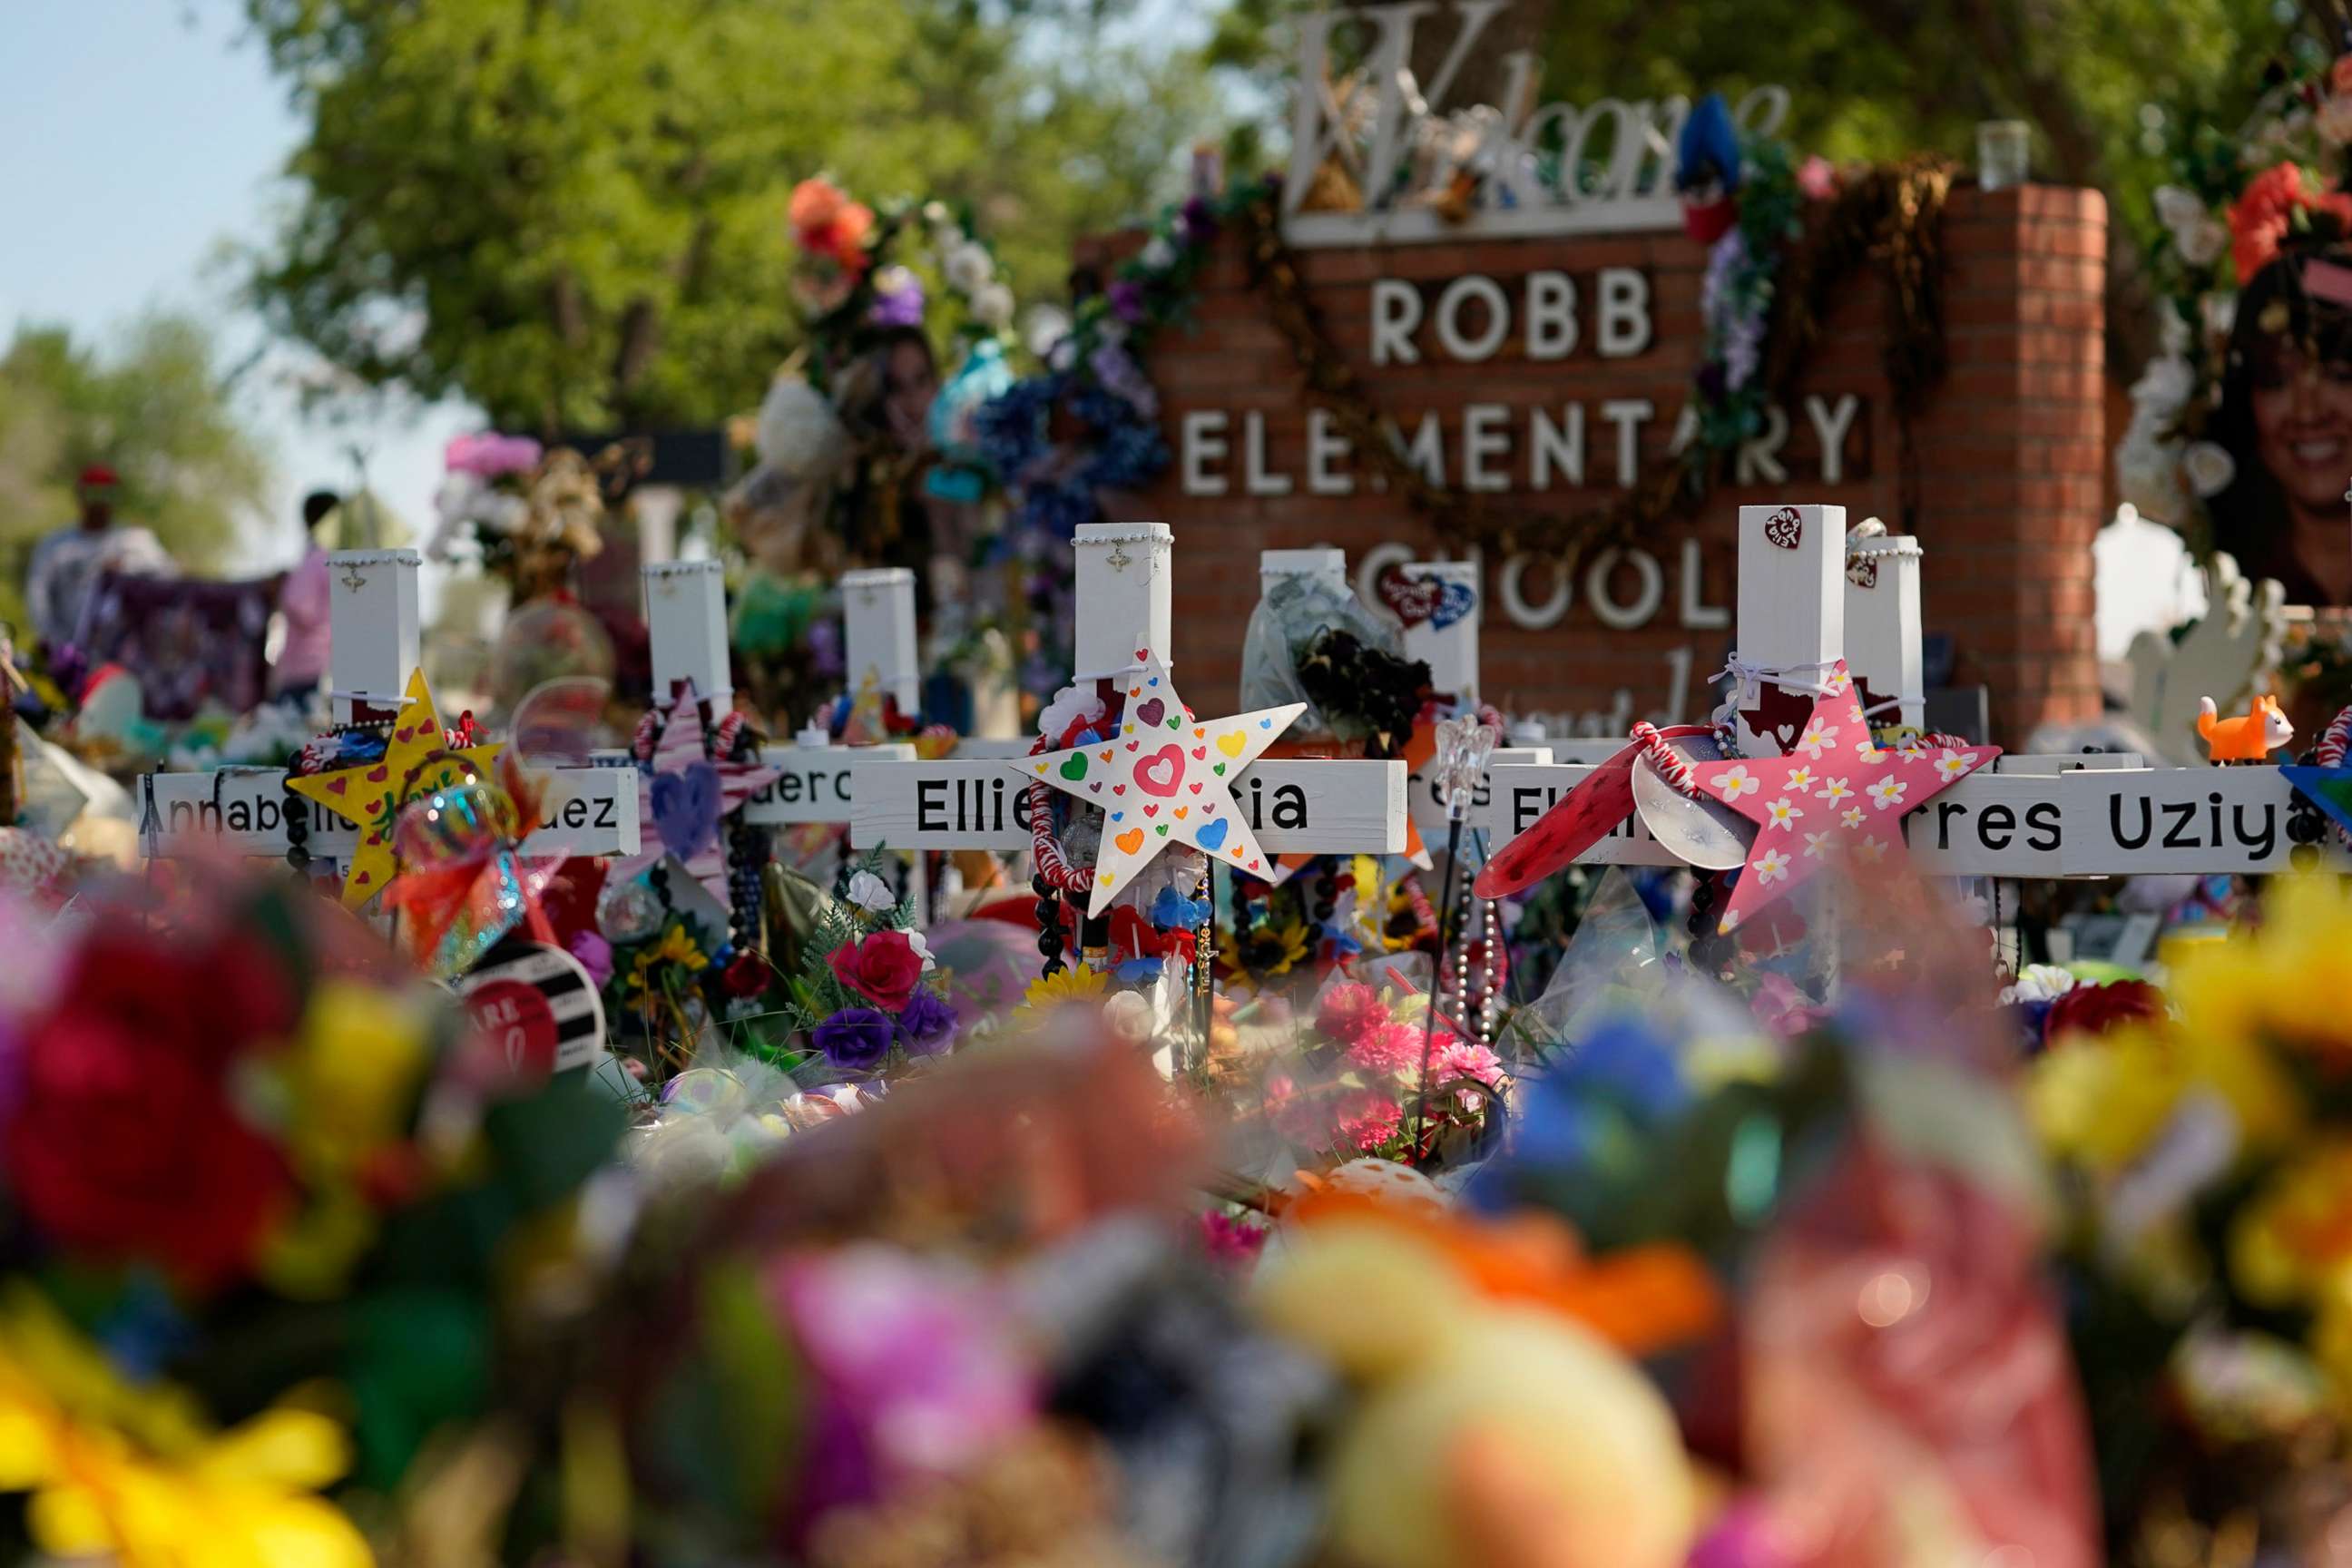 PHOTO: A makeshift memorial honoring those recently killed is formed around Robb Elementary School, July 10, 2022, in Uvalde, Texas. 